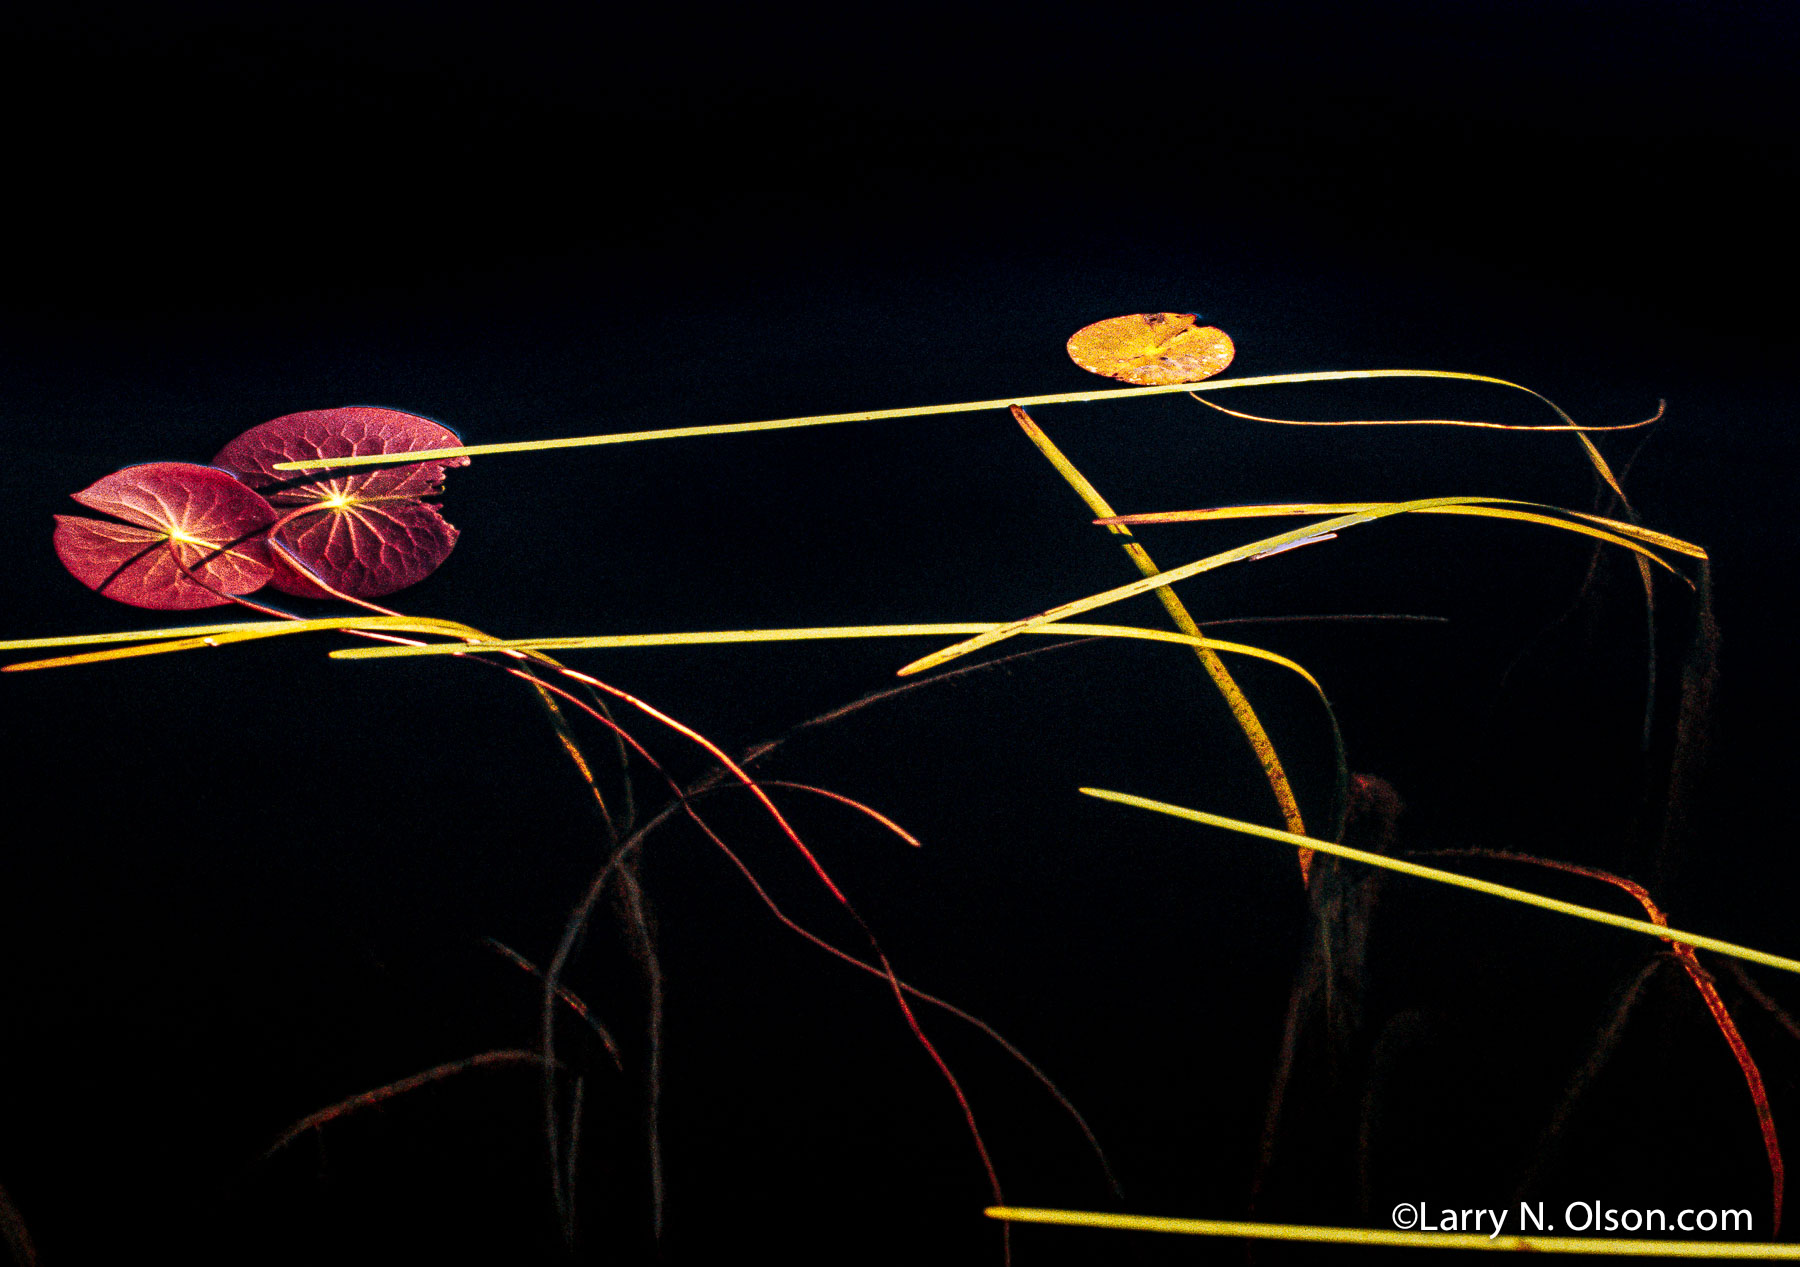 Water Lilies#1, Boundary Waters Canoe Area, MN | Lily pads and fronds are suspended in black water.